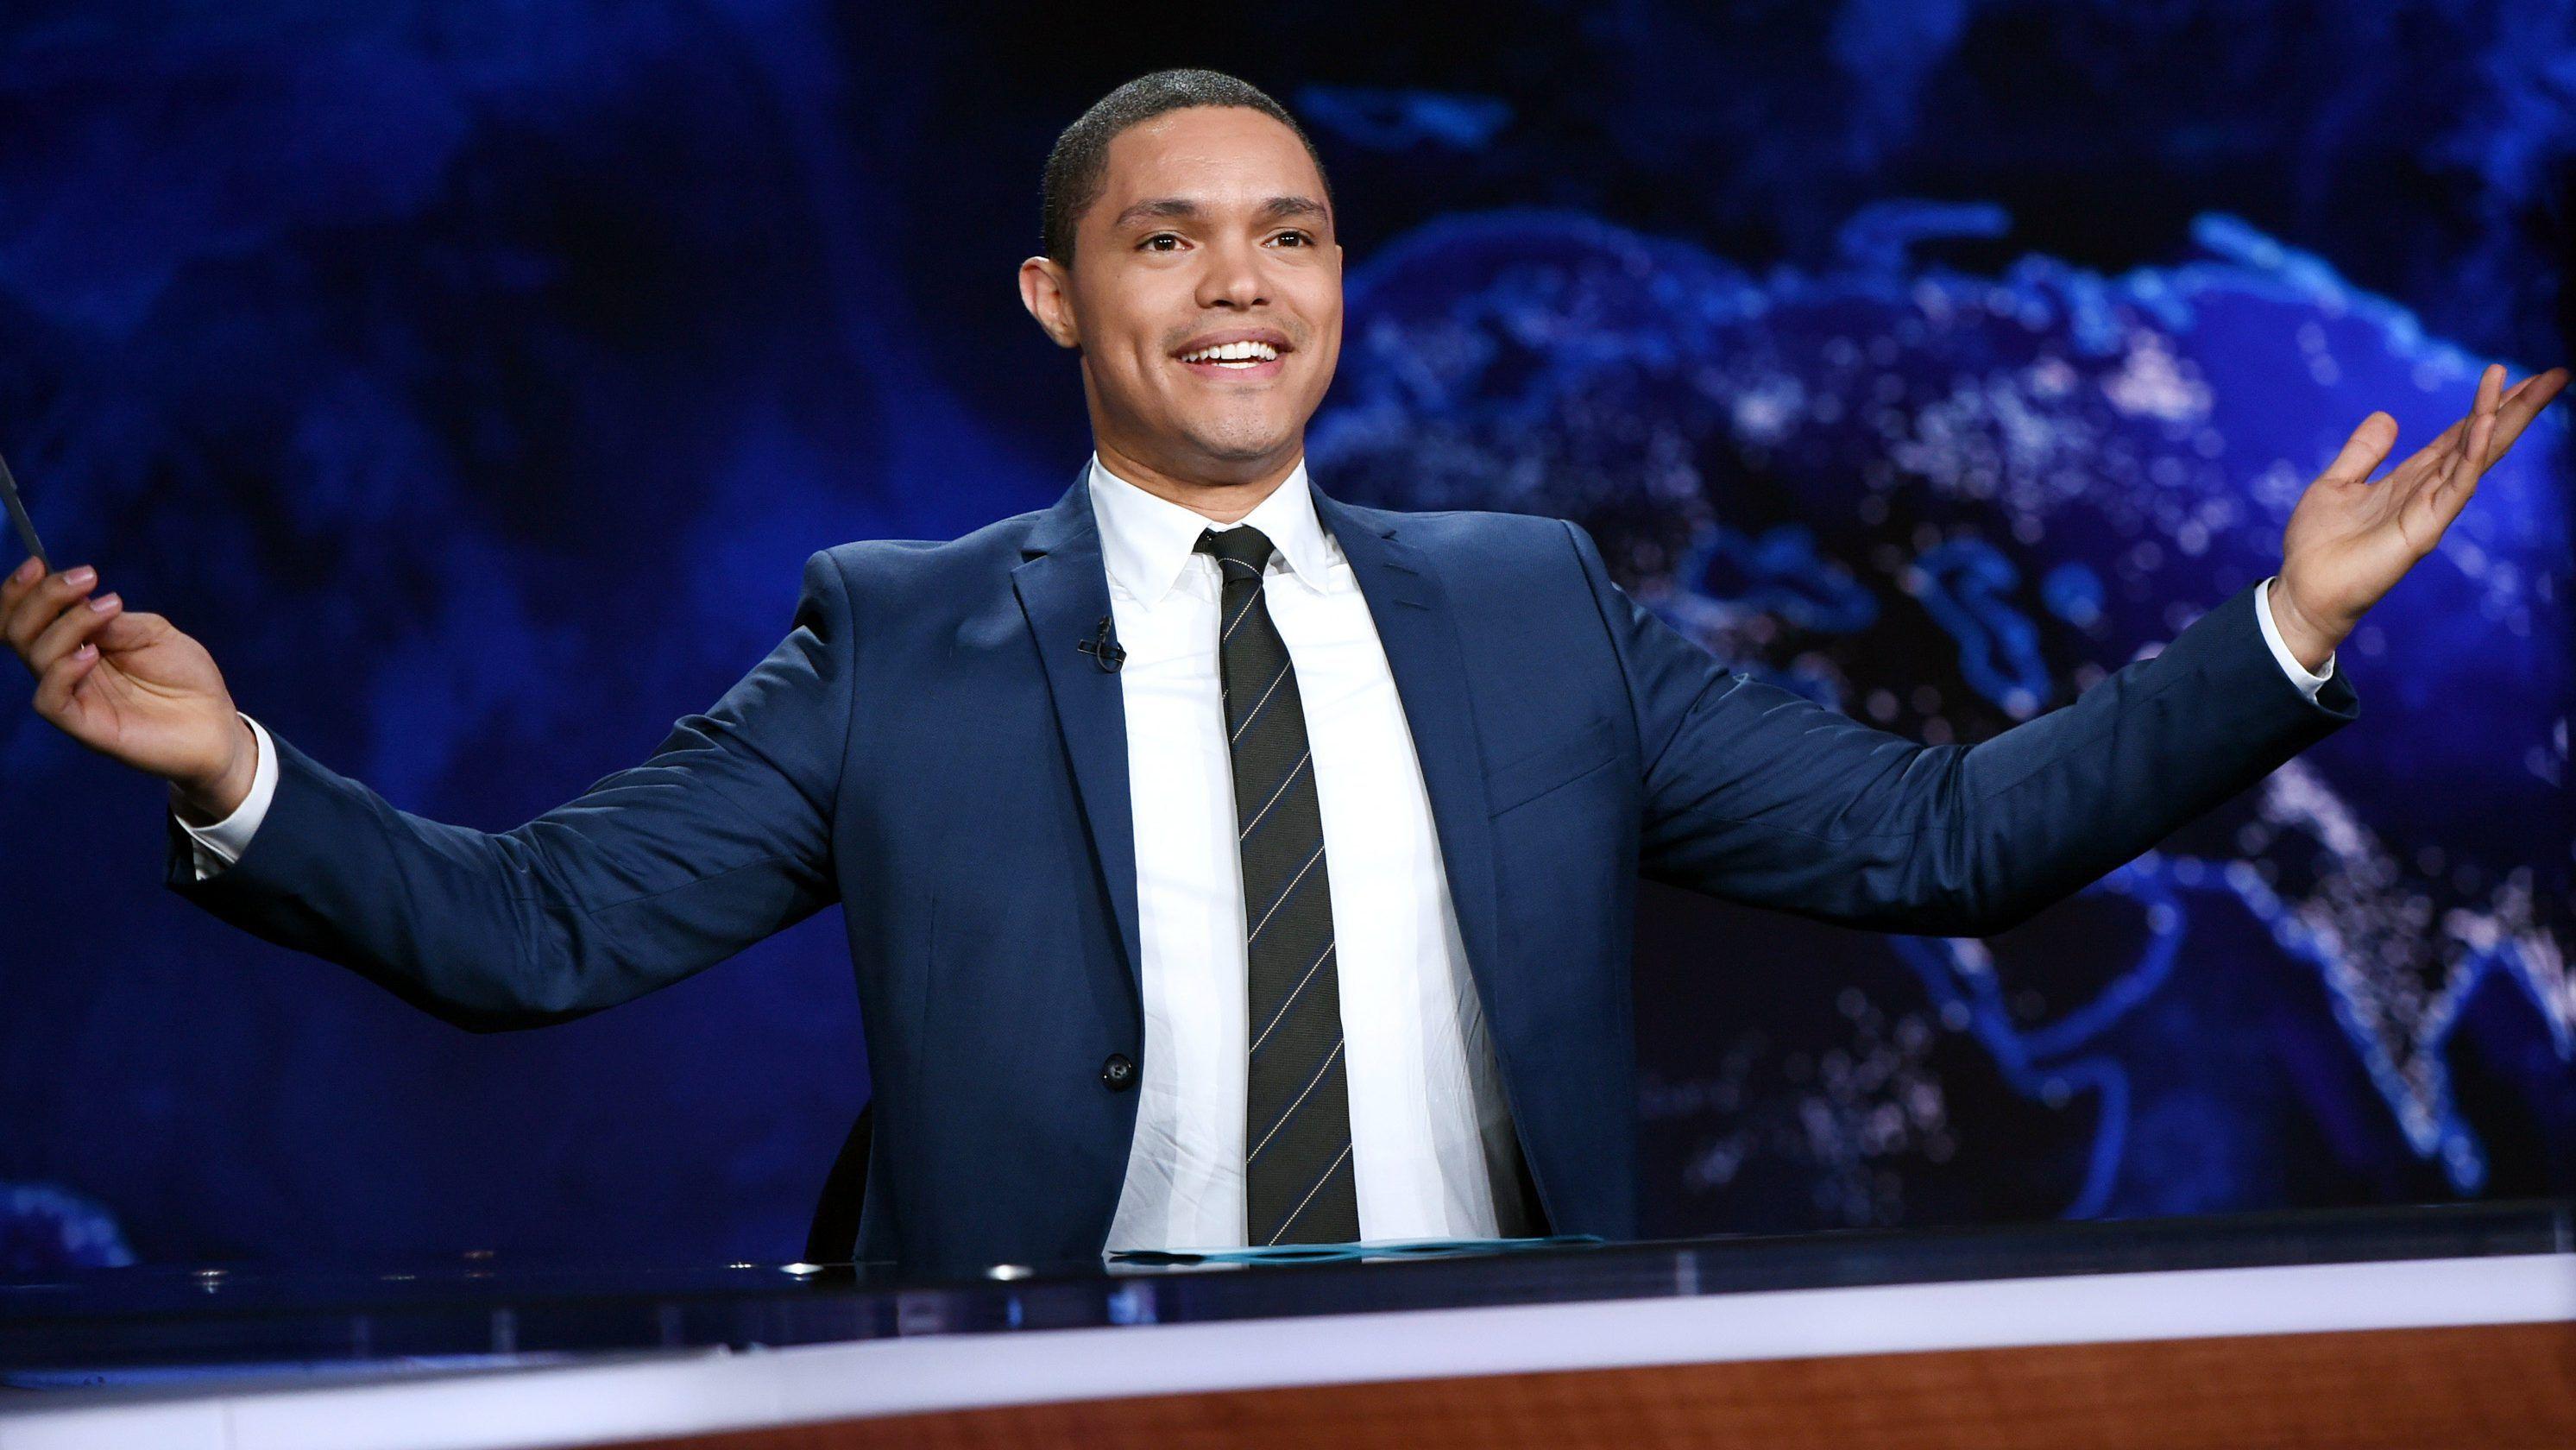 The Daily Show With Trevor Noah HD Wallpaper. Background Image